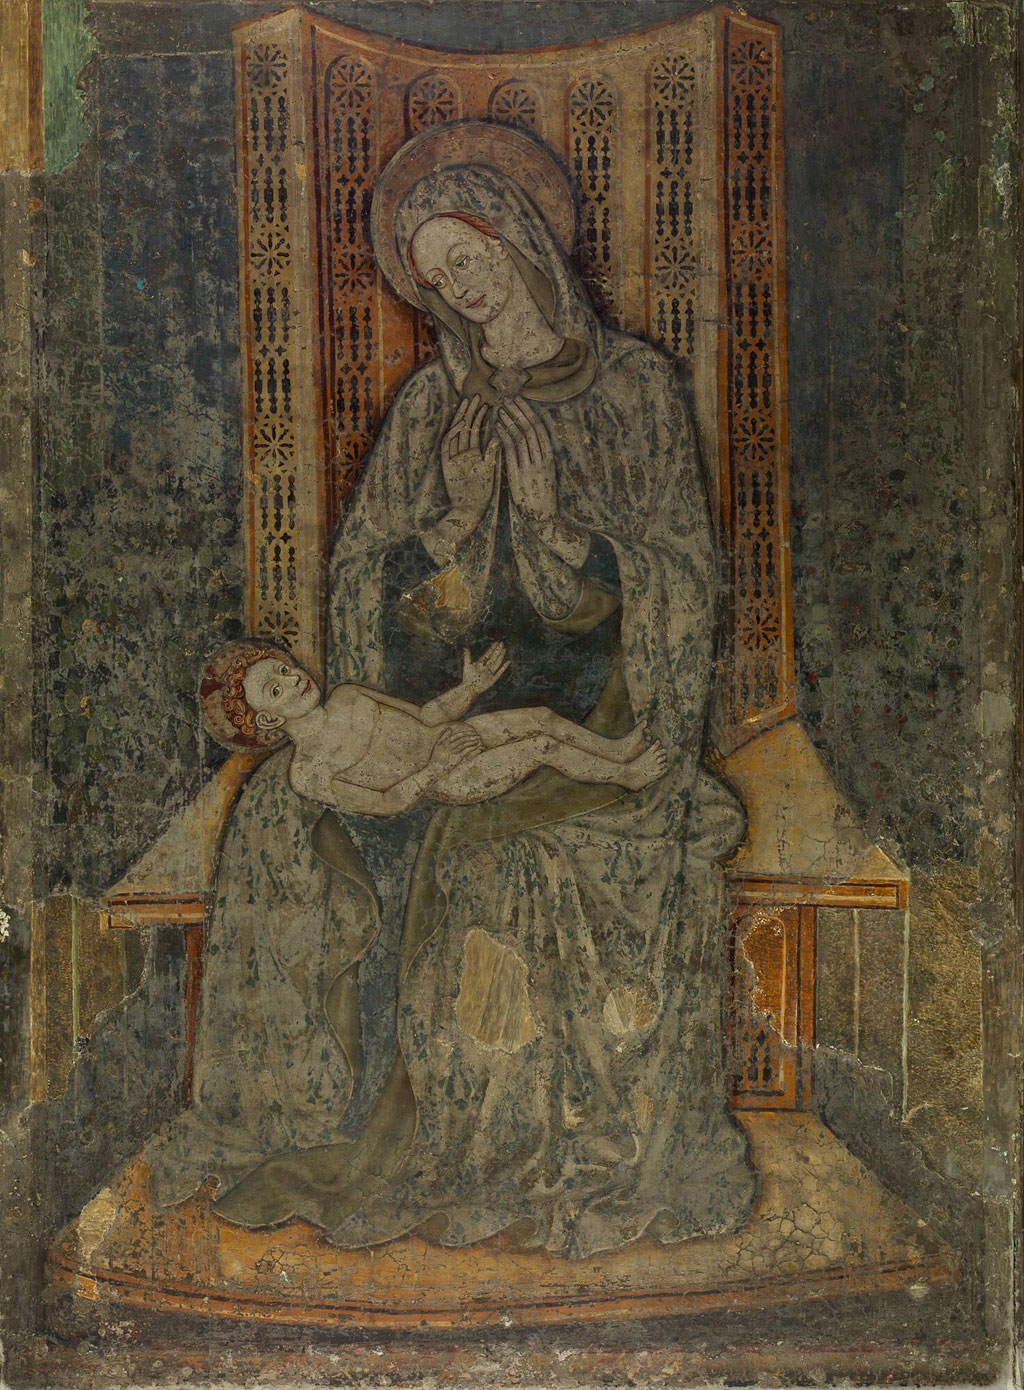 Giovanni-di-Francia-The-Virgin-and-Child-Enthroned-web.jpg